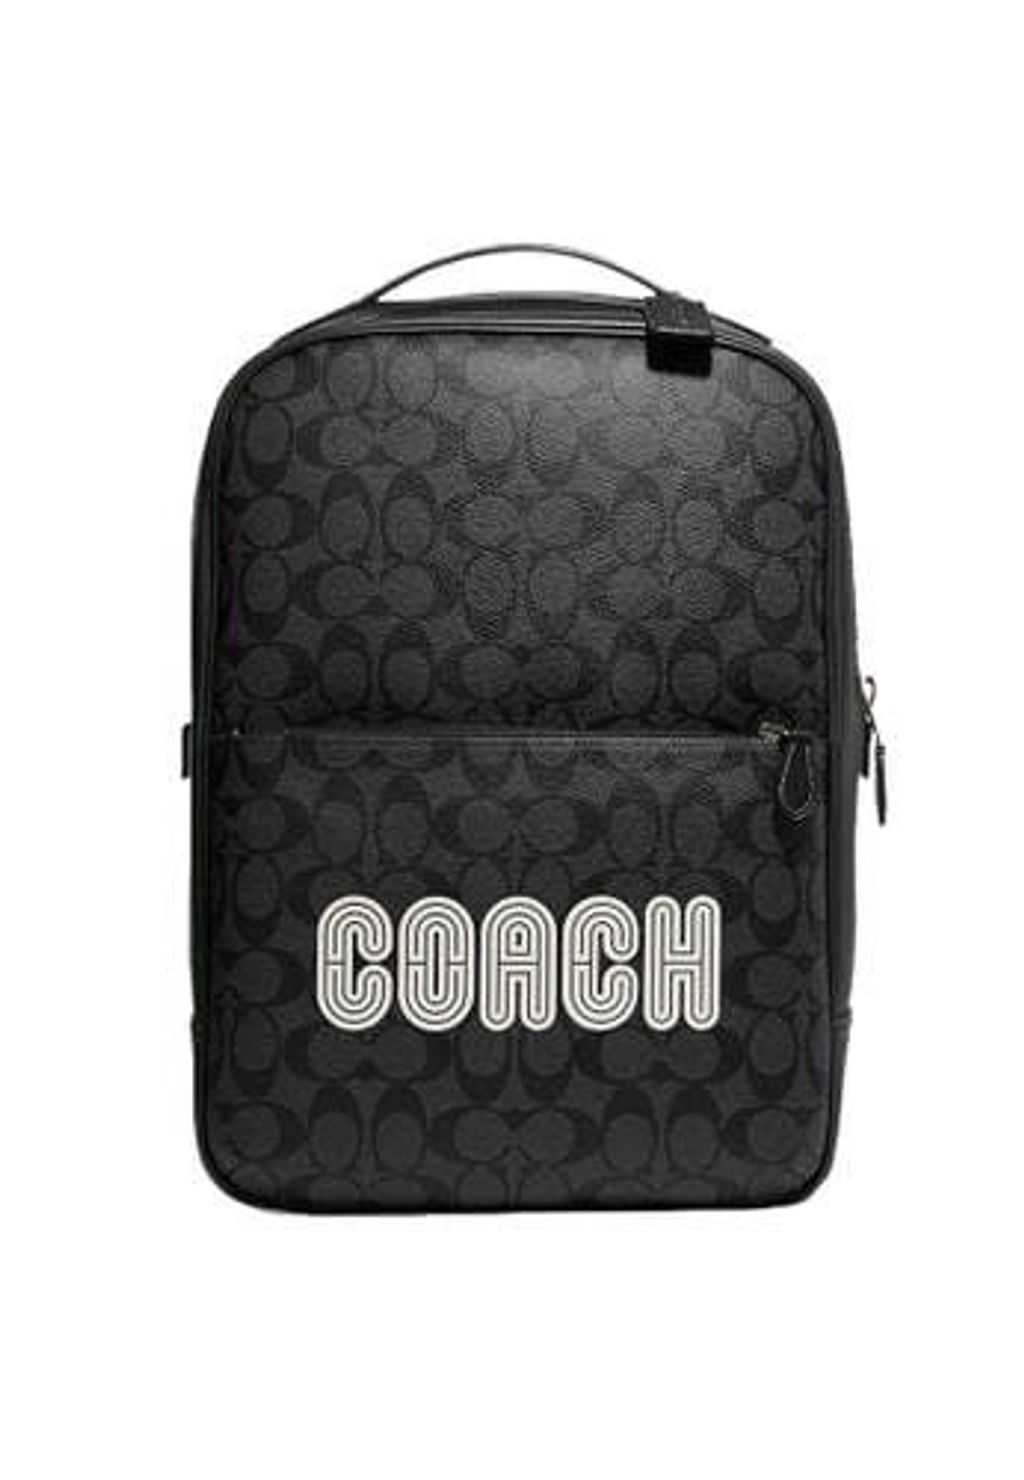 handbagbranded.com getlush outlet personalshopper usa malaysia ready stock Coach WESTWAY BACKPACK 1